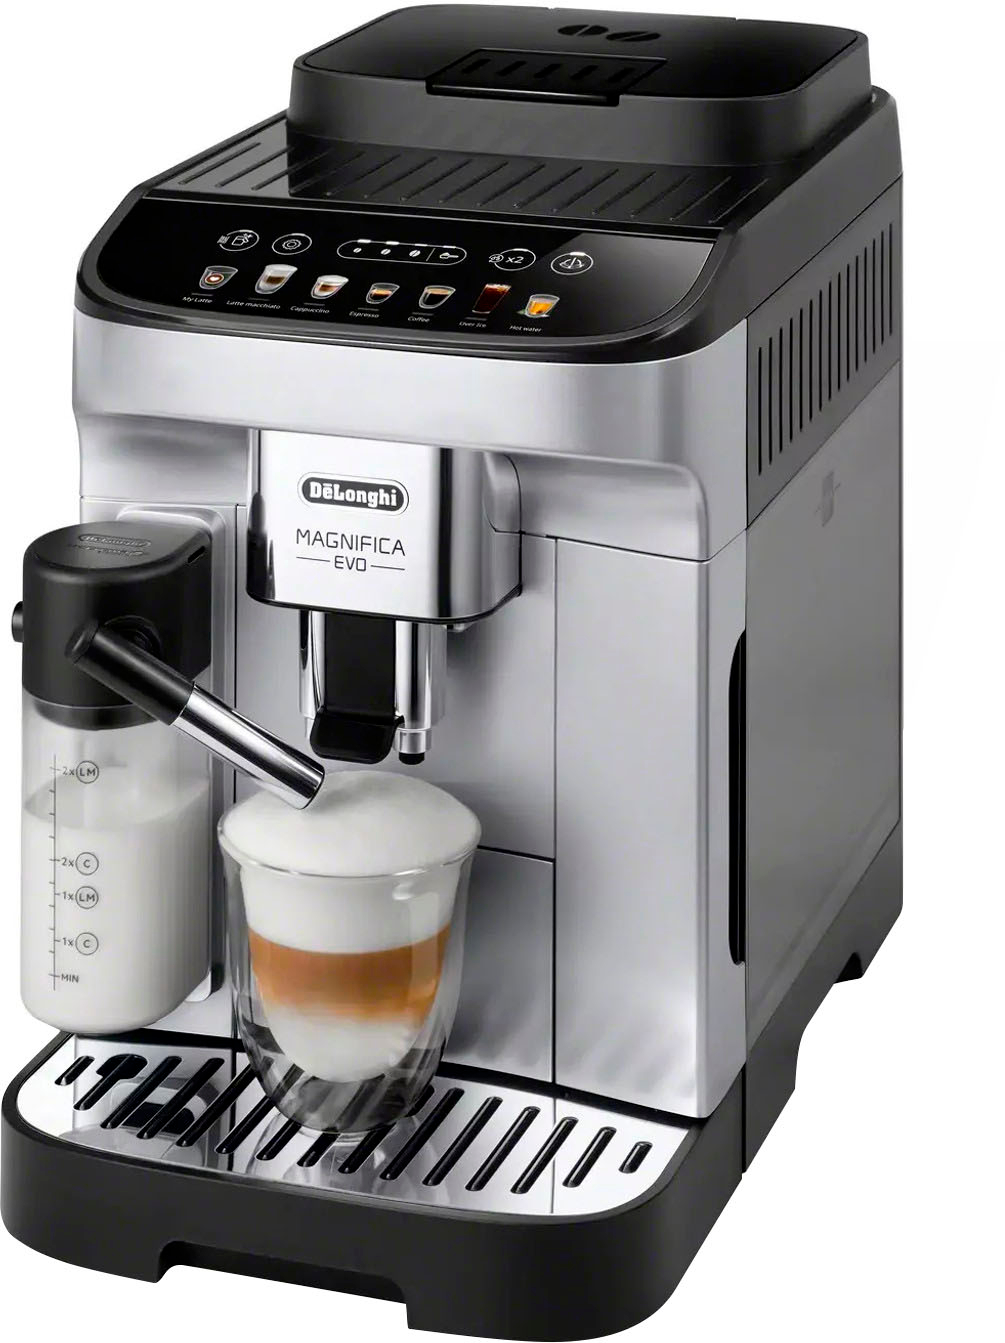 Magnifica Evo  How to set up the coffee machine for the first time 